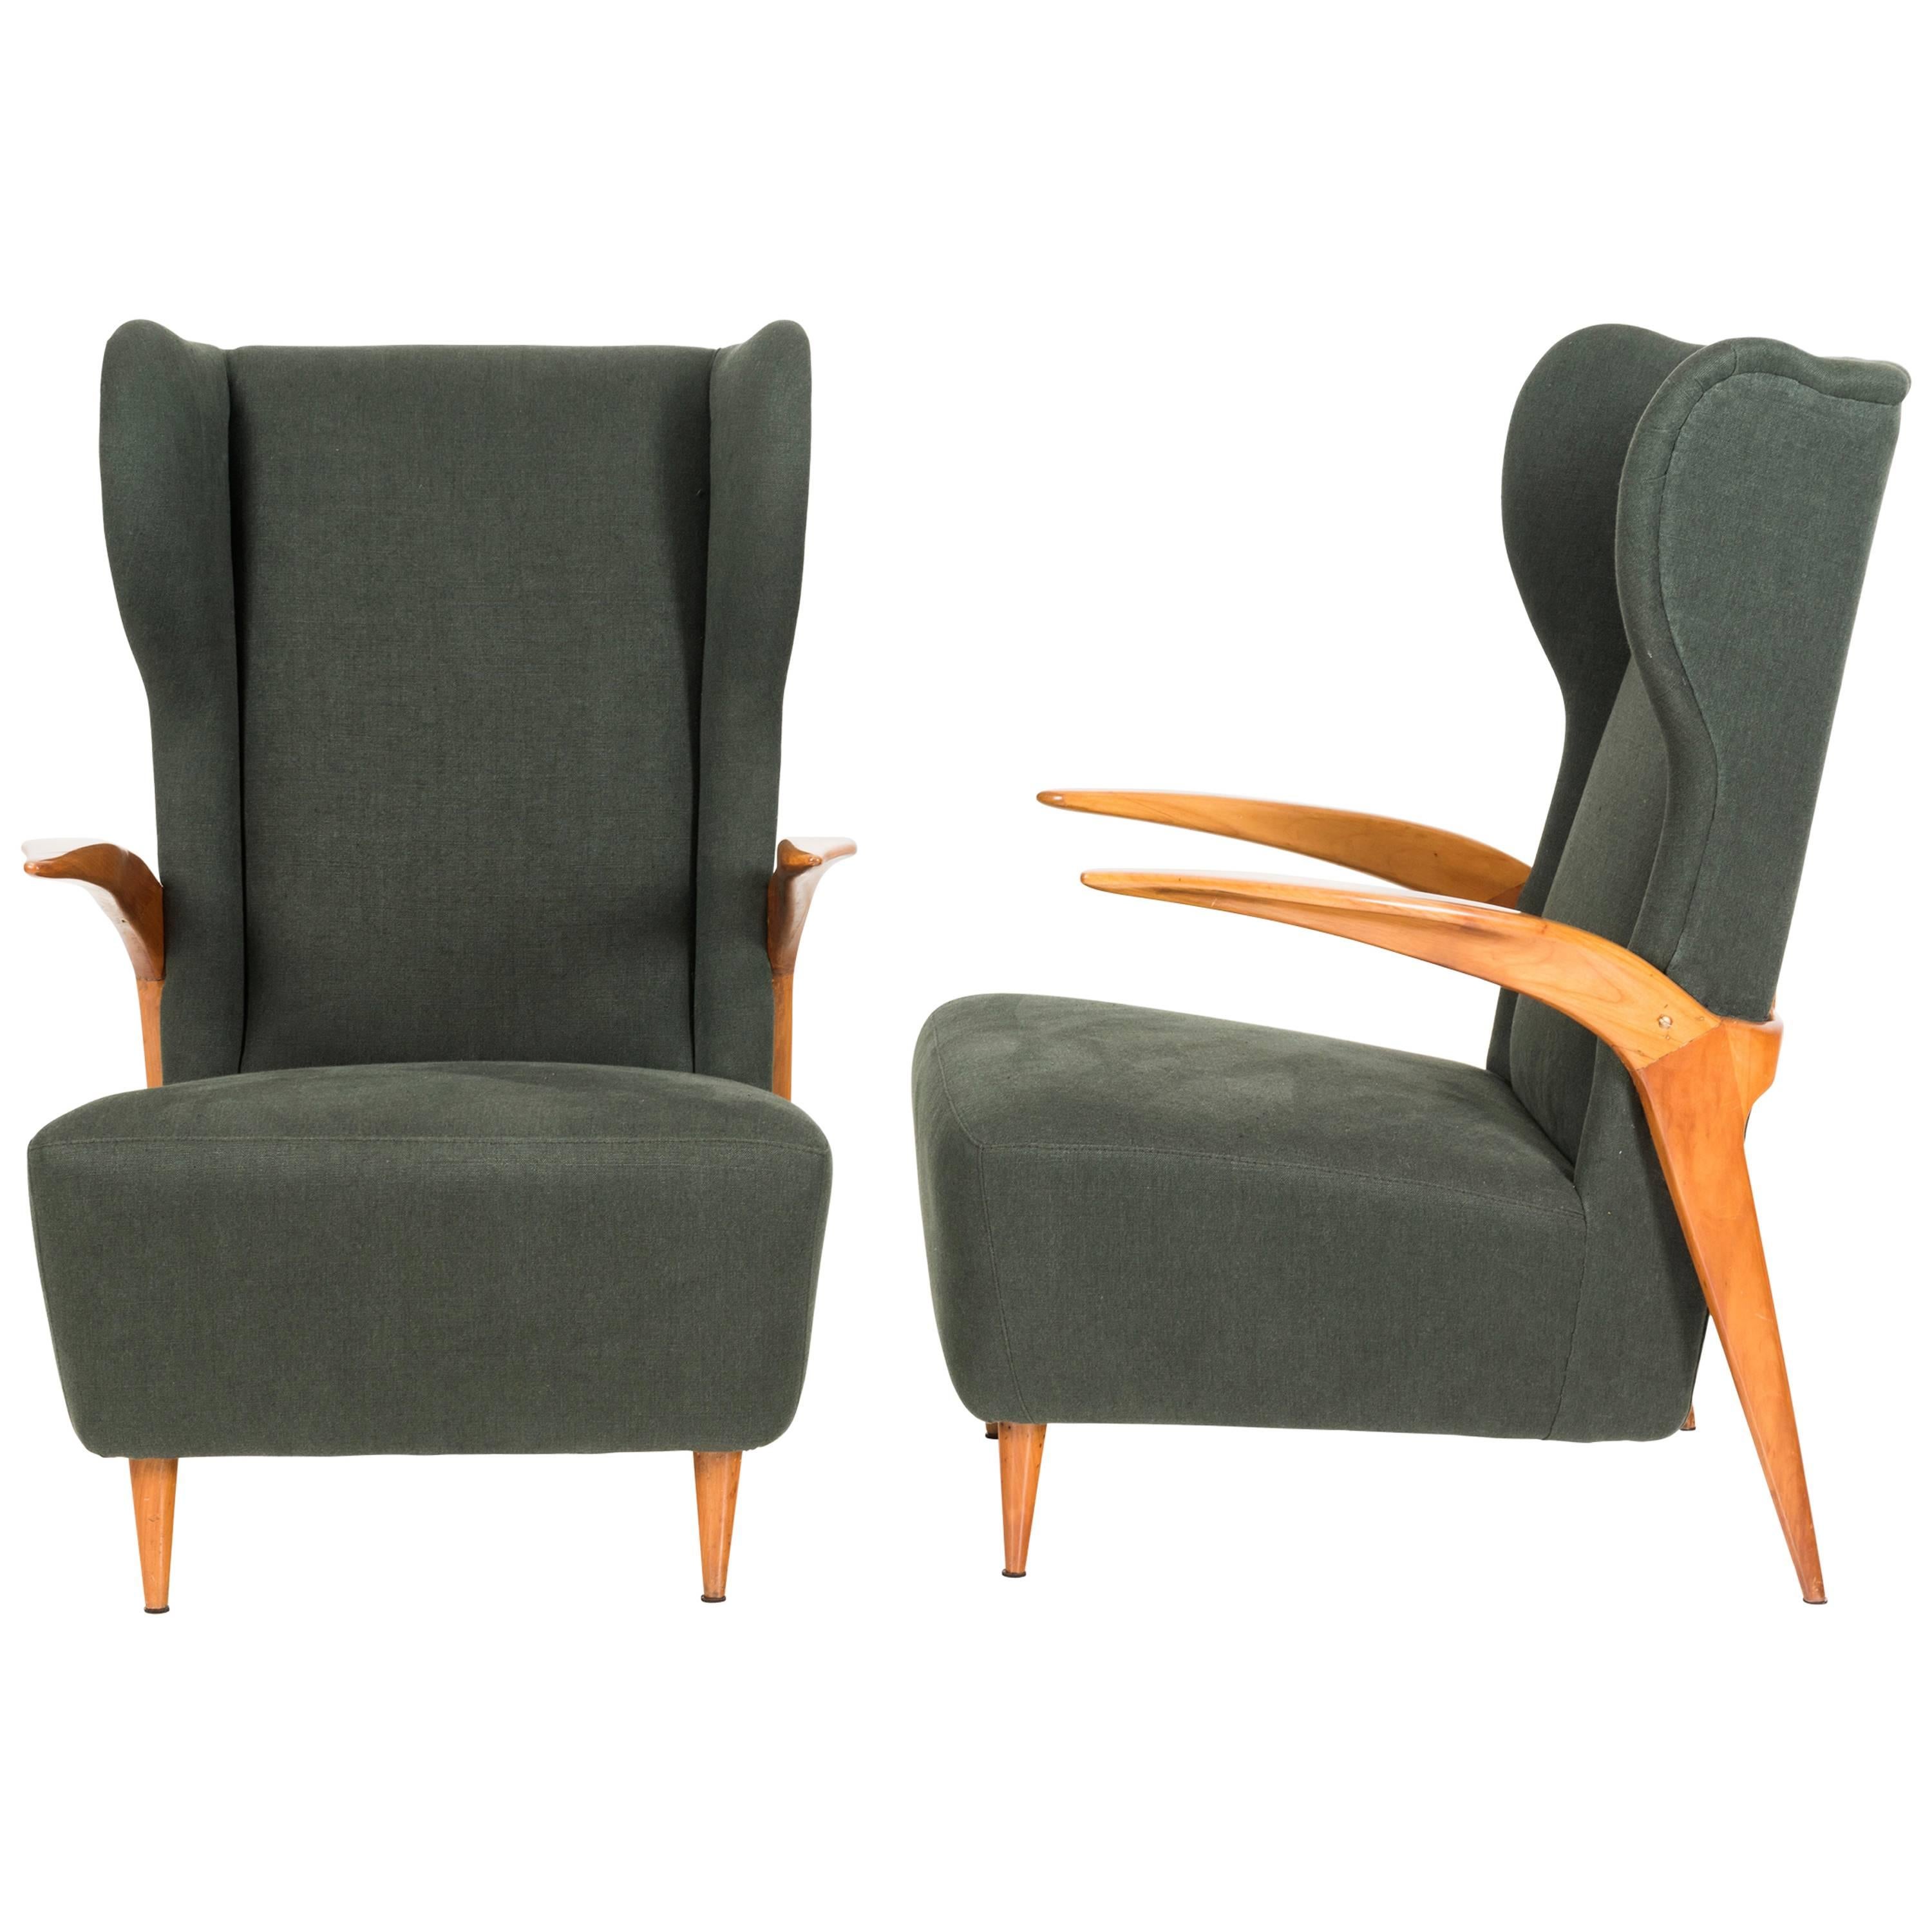 Two Italian Vintage Armchairs Cherrywood Structure Attributed to Enrico Ciuti For Sale